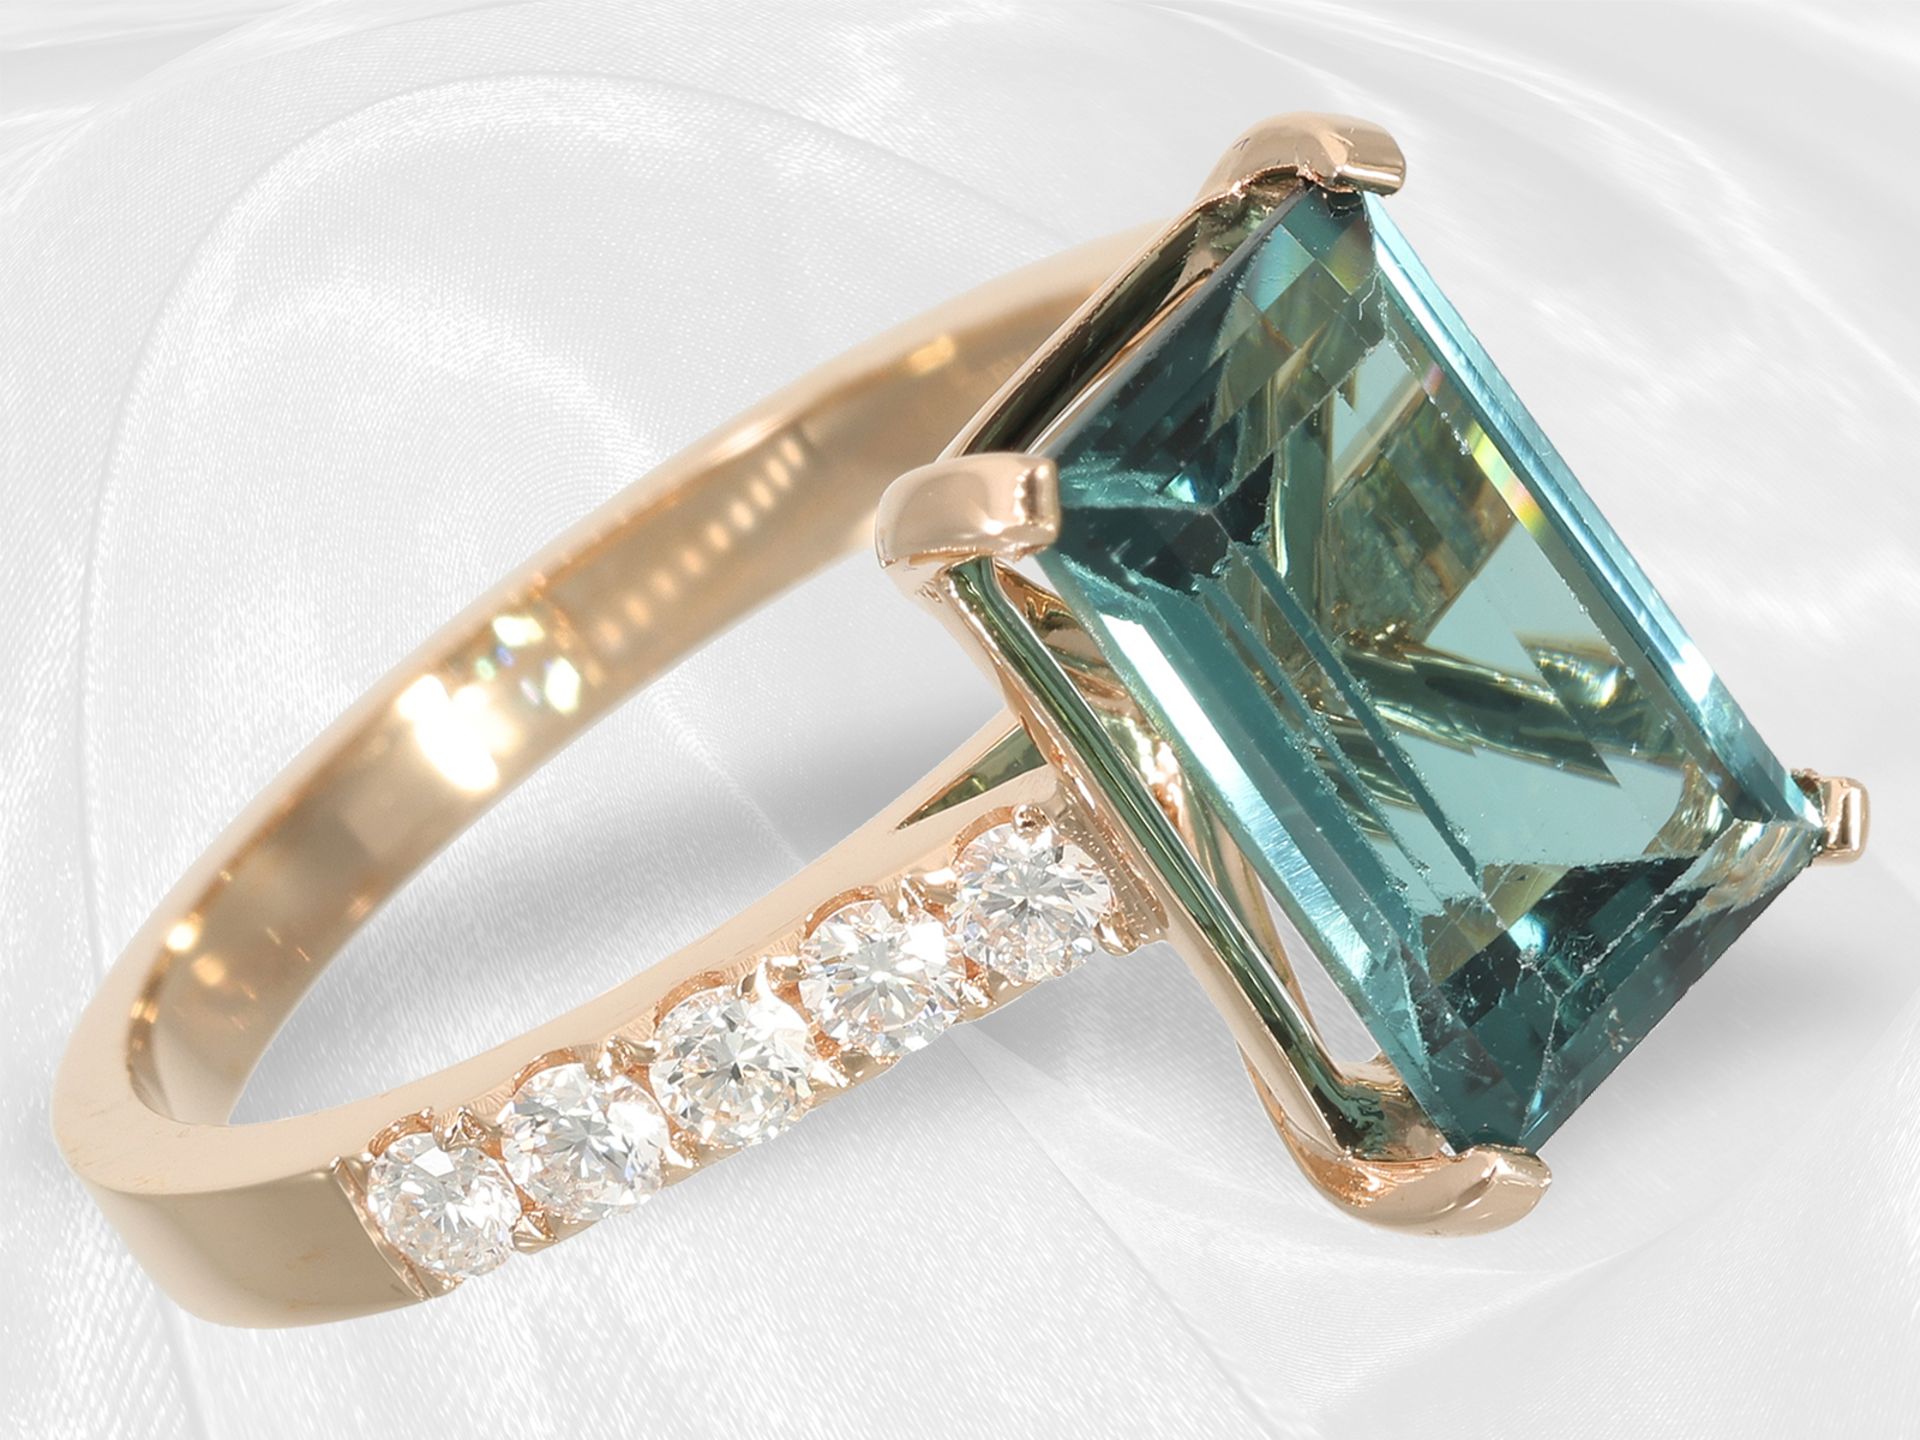 Ring: beautiful goldsmith's ring with tourmaline and brilliant-cut diamonds, 18K gold - Image 2 of 10